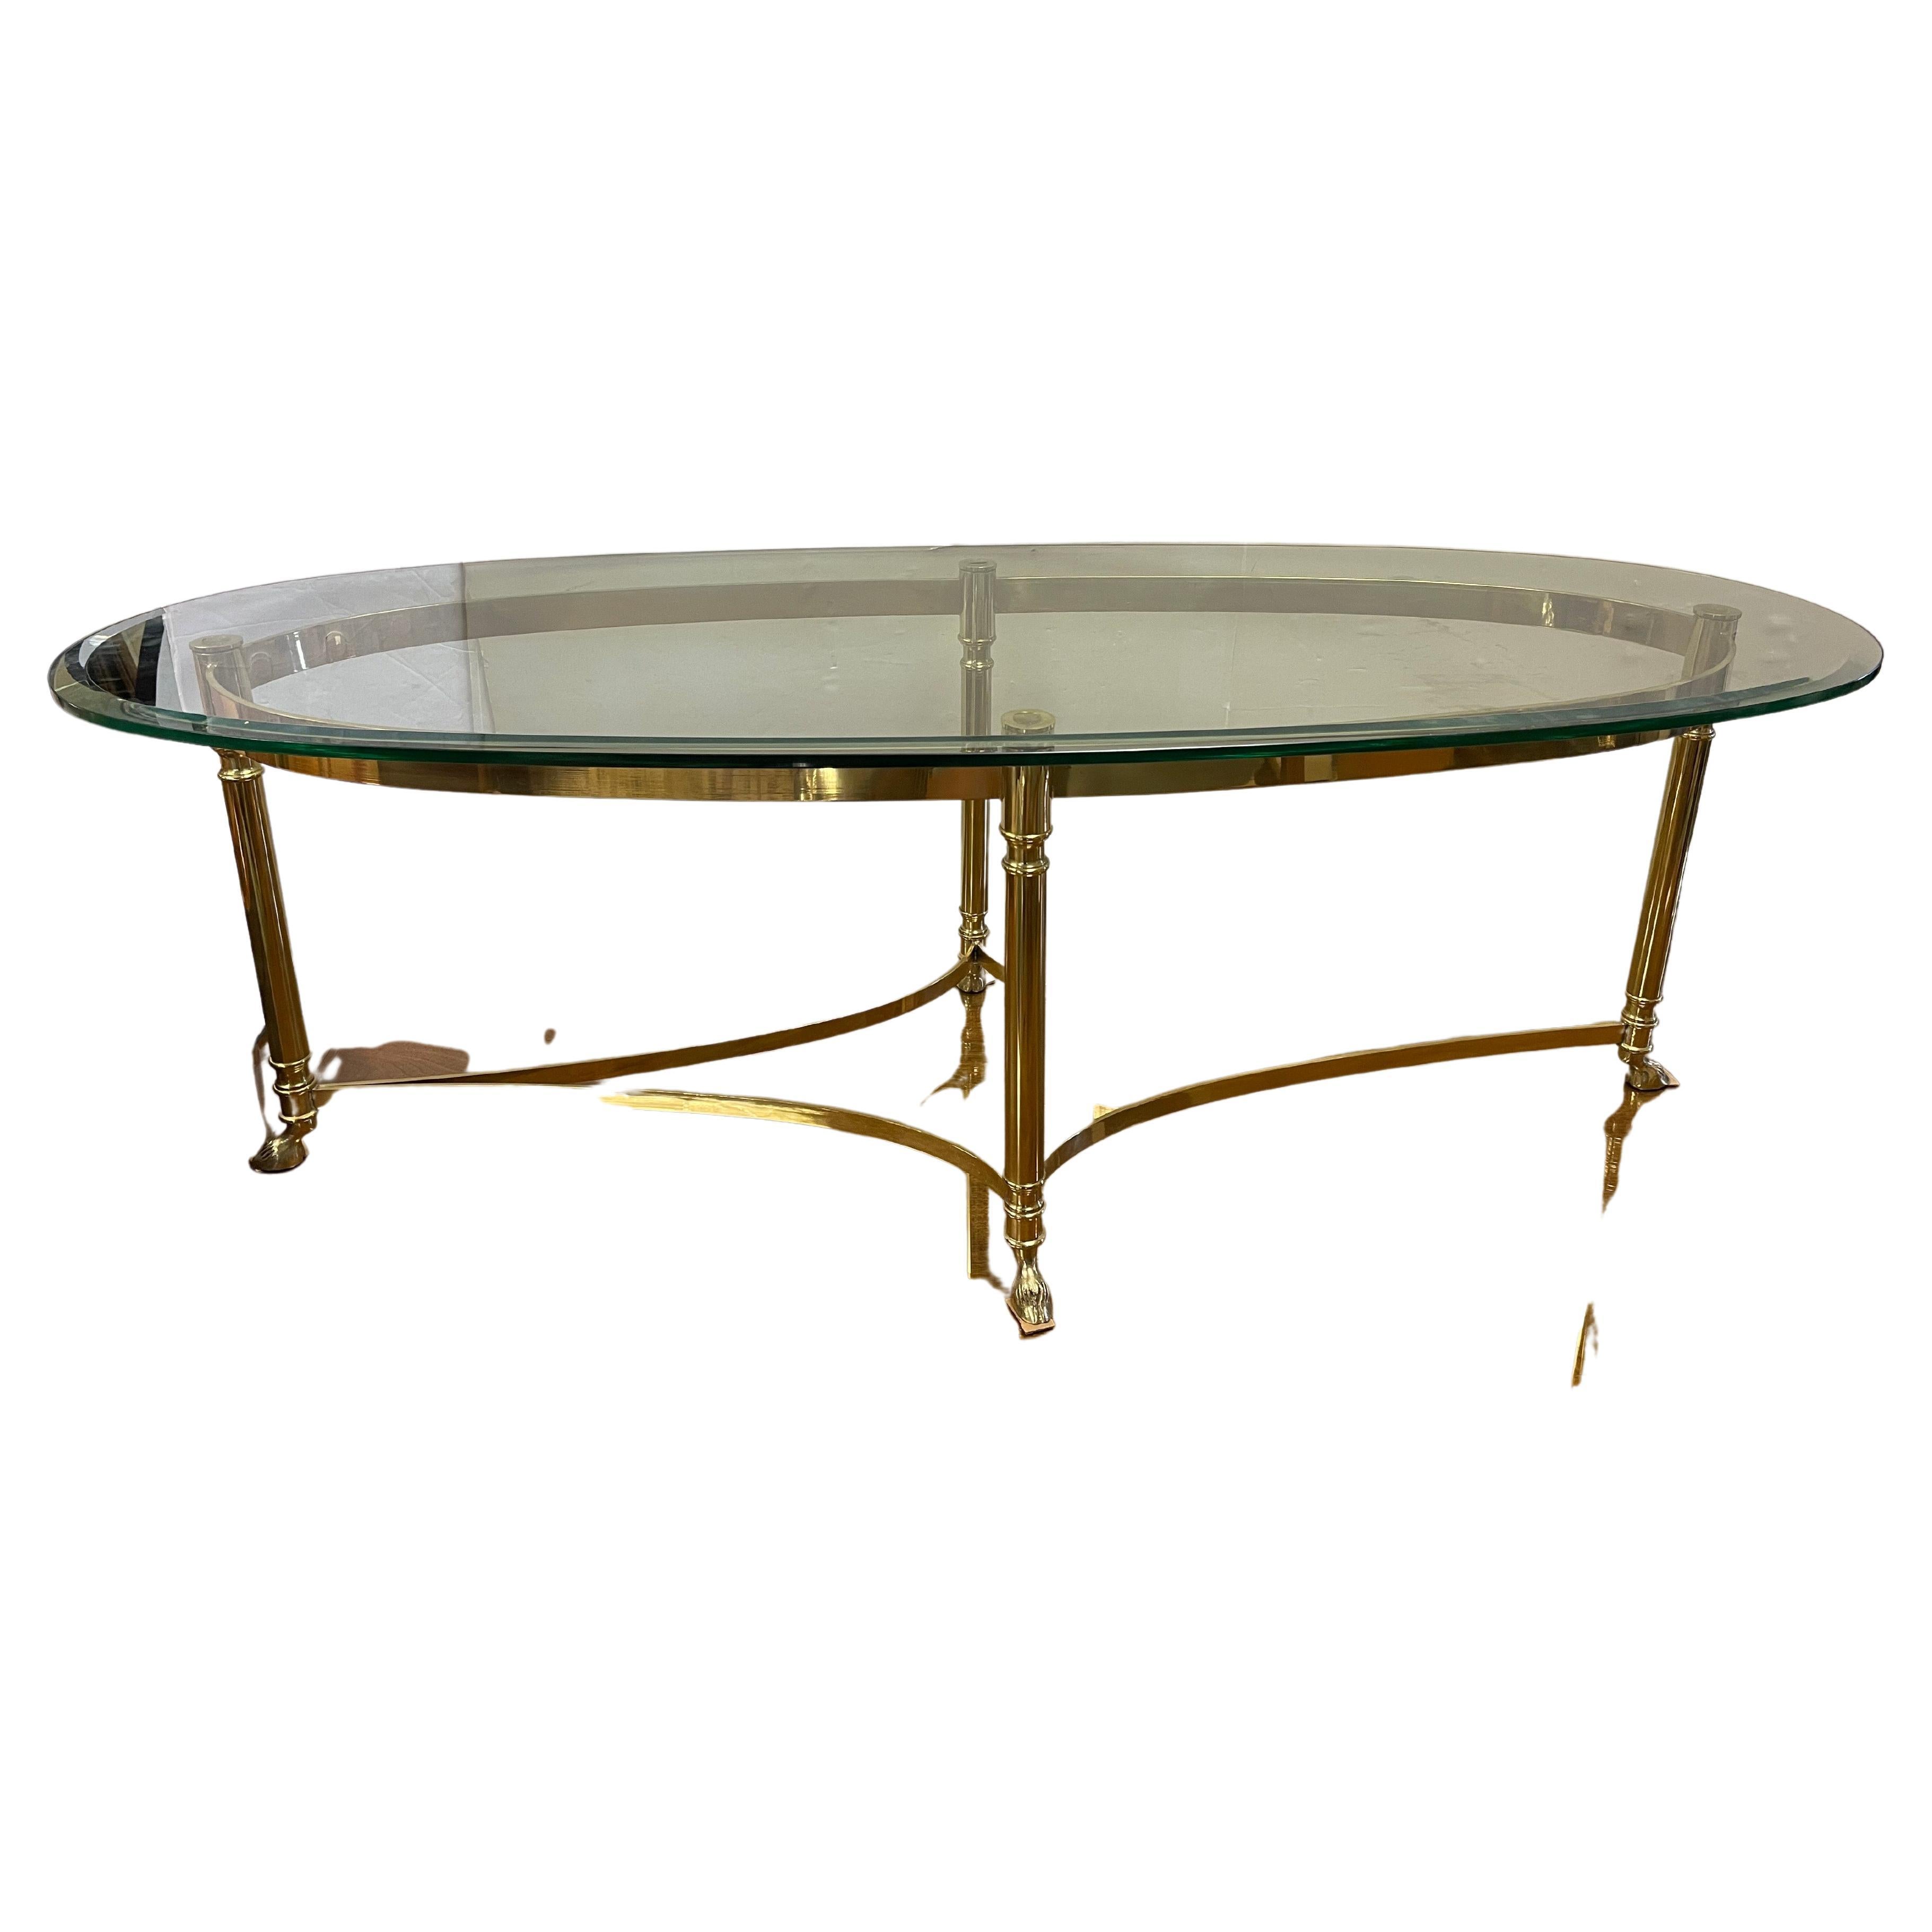 Adorned with a brass base featuring hoof feet, this classic Maison Jansen large oval cocktail table is sure to impress. Note the scale via the dimensions below. Circa 1970s and with lines to die for. Own the best!